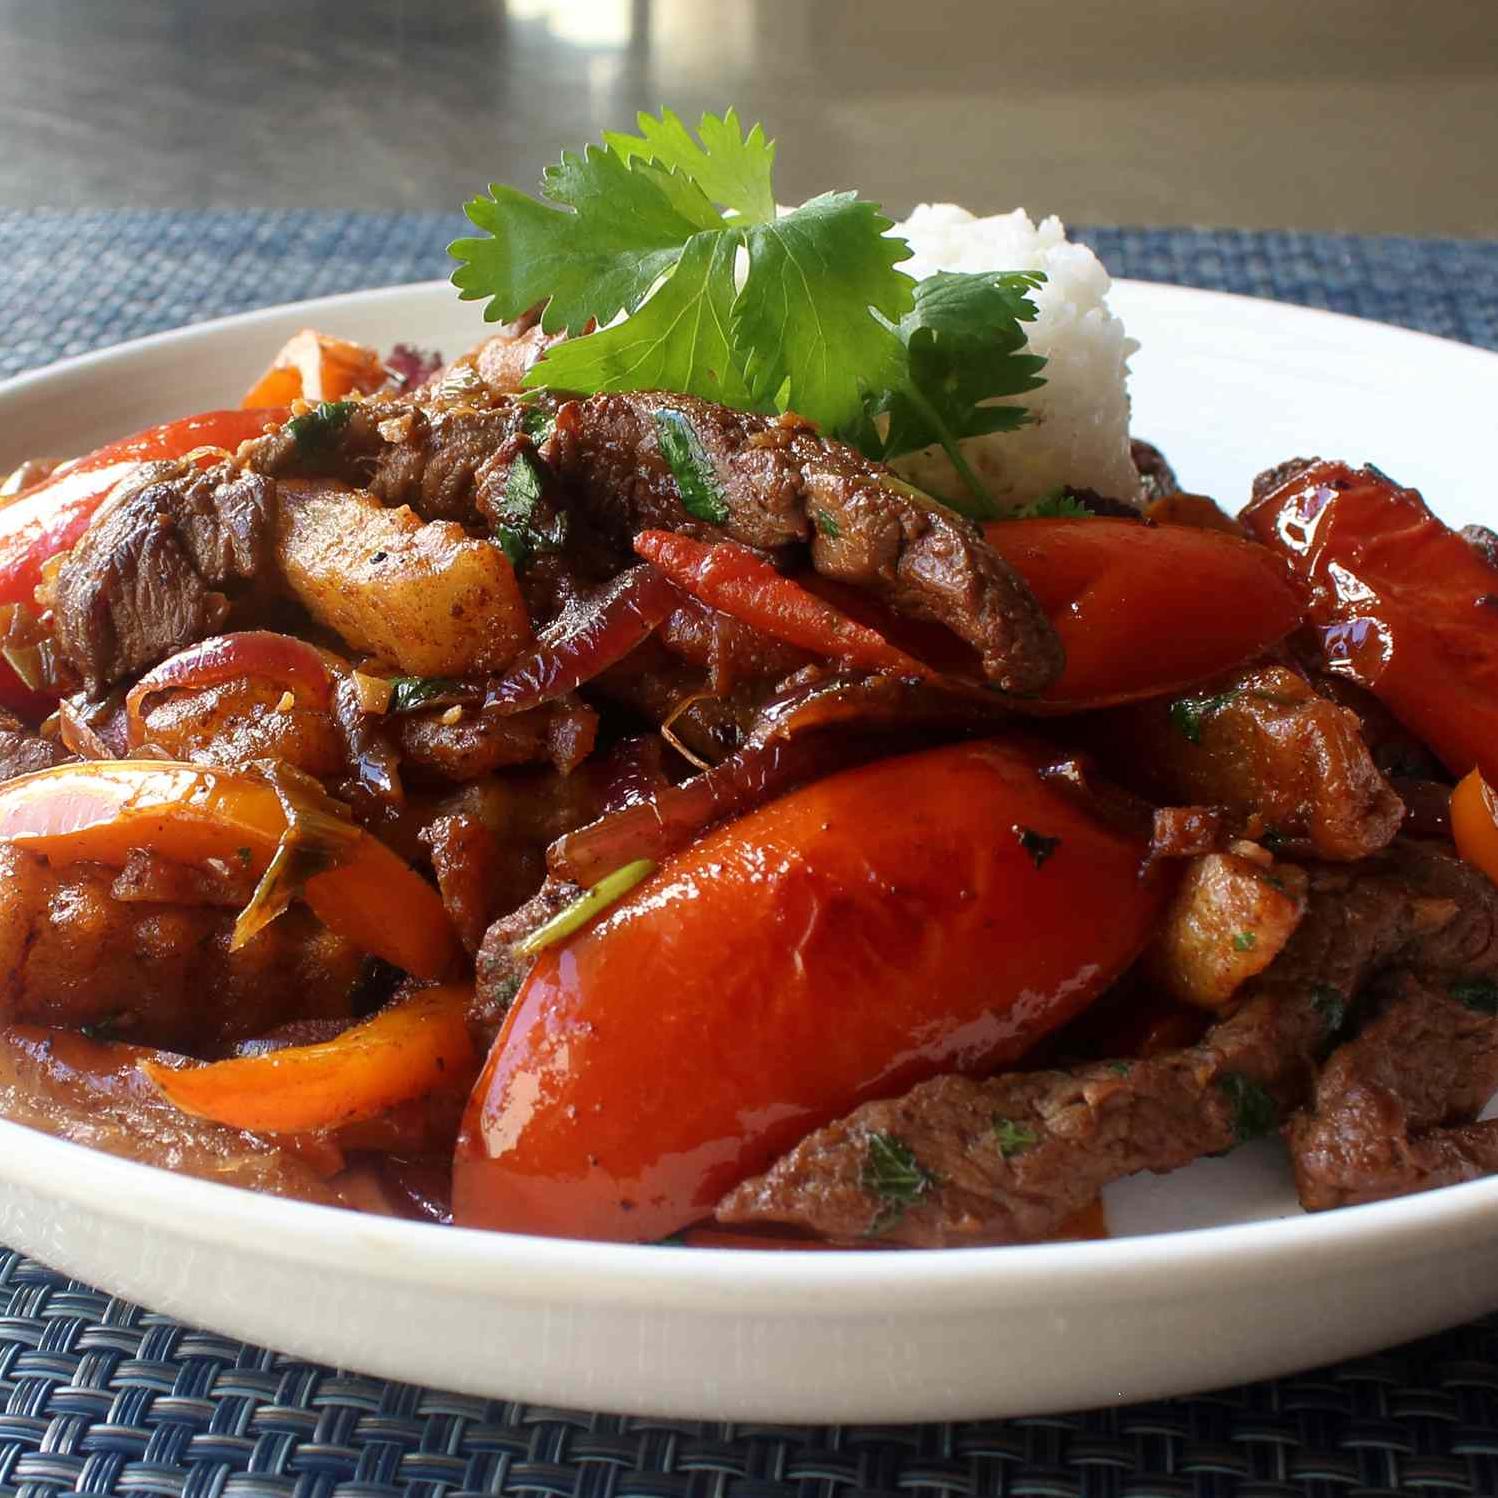  Have your taste buds travel to Peru with this delectable Lomo Saltado recipe.